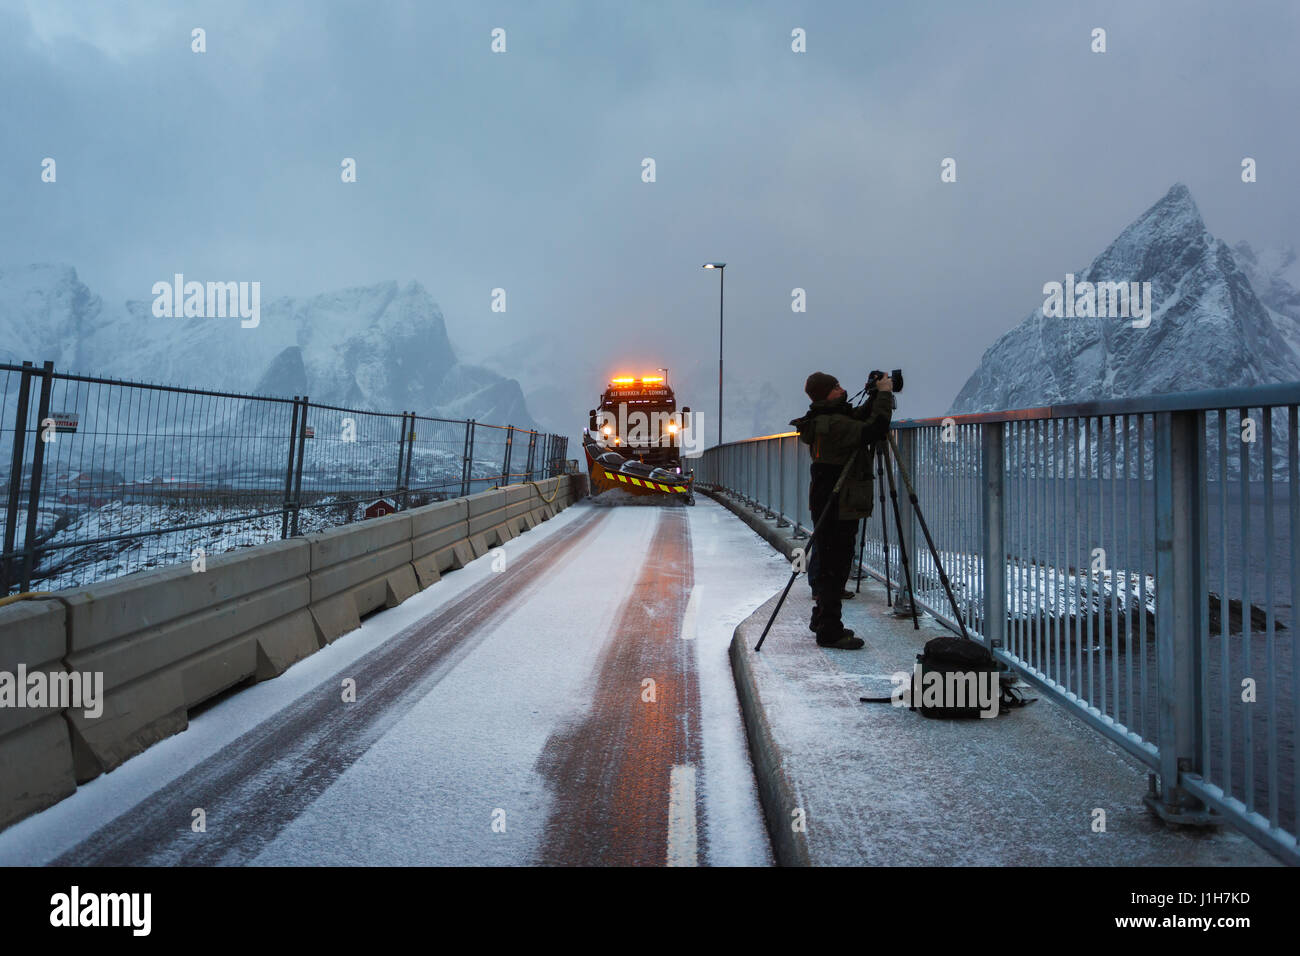 Hamnoy, Norway - March 16 2017: The snow-removing machine on the bridge with photographer on the foreground in snowstorm Stock Photo